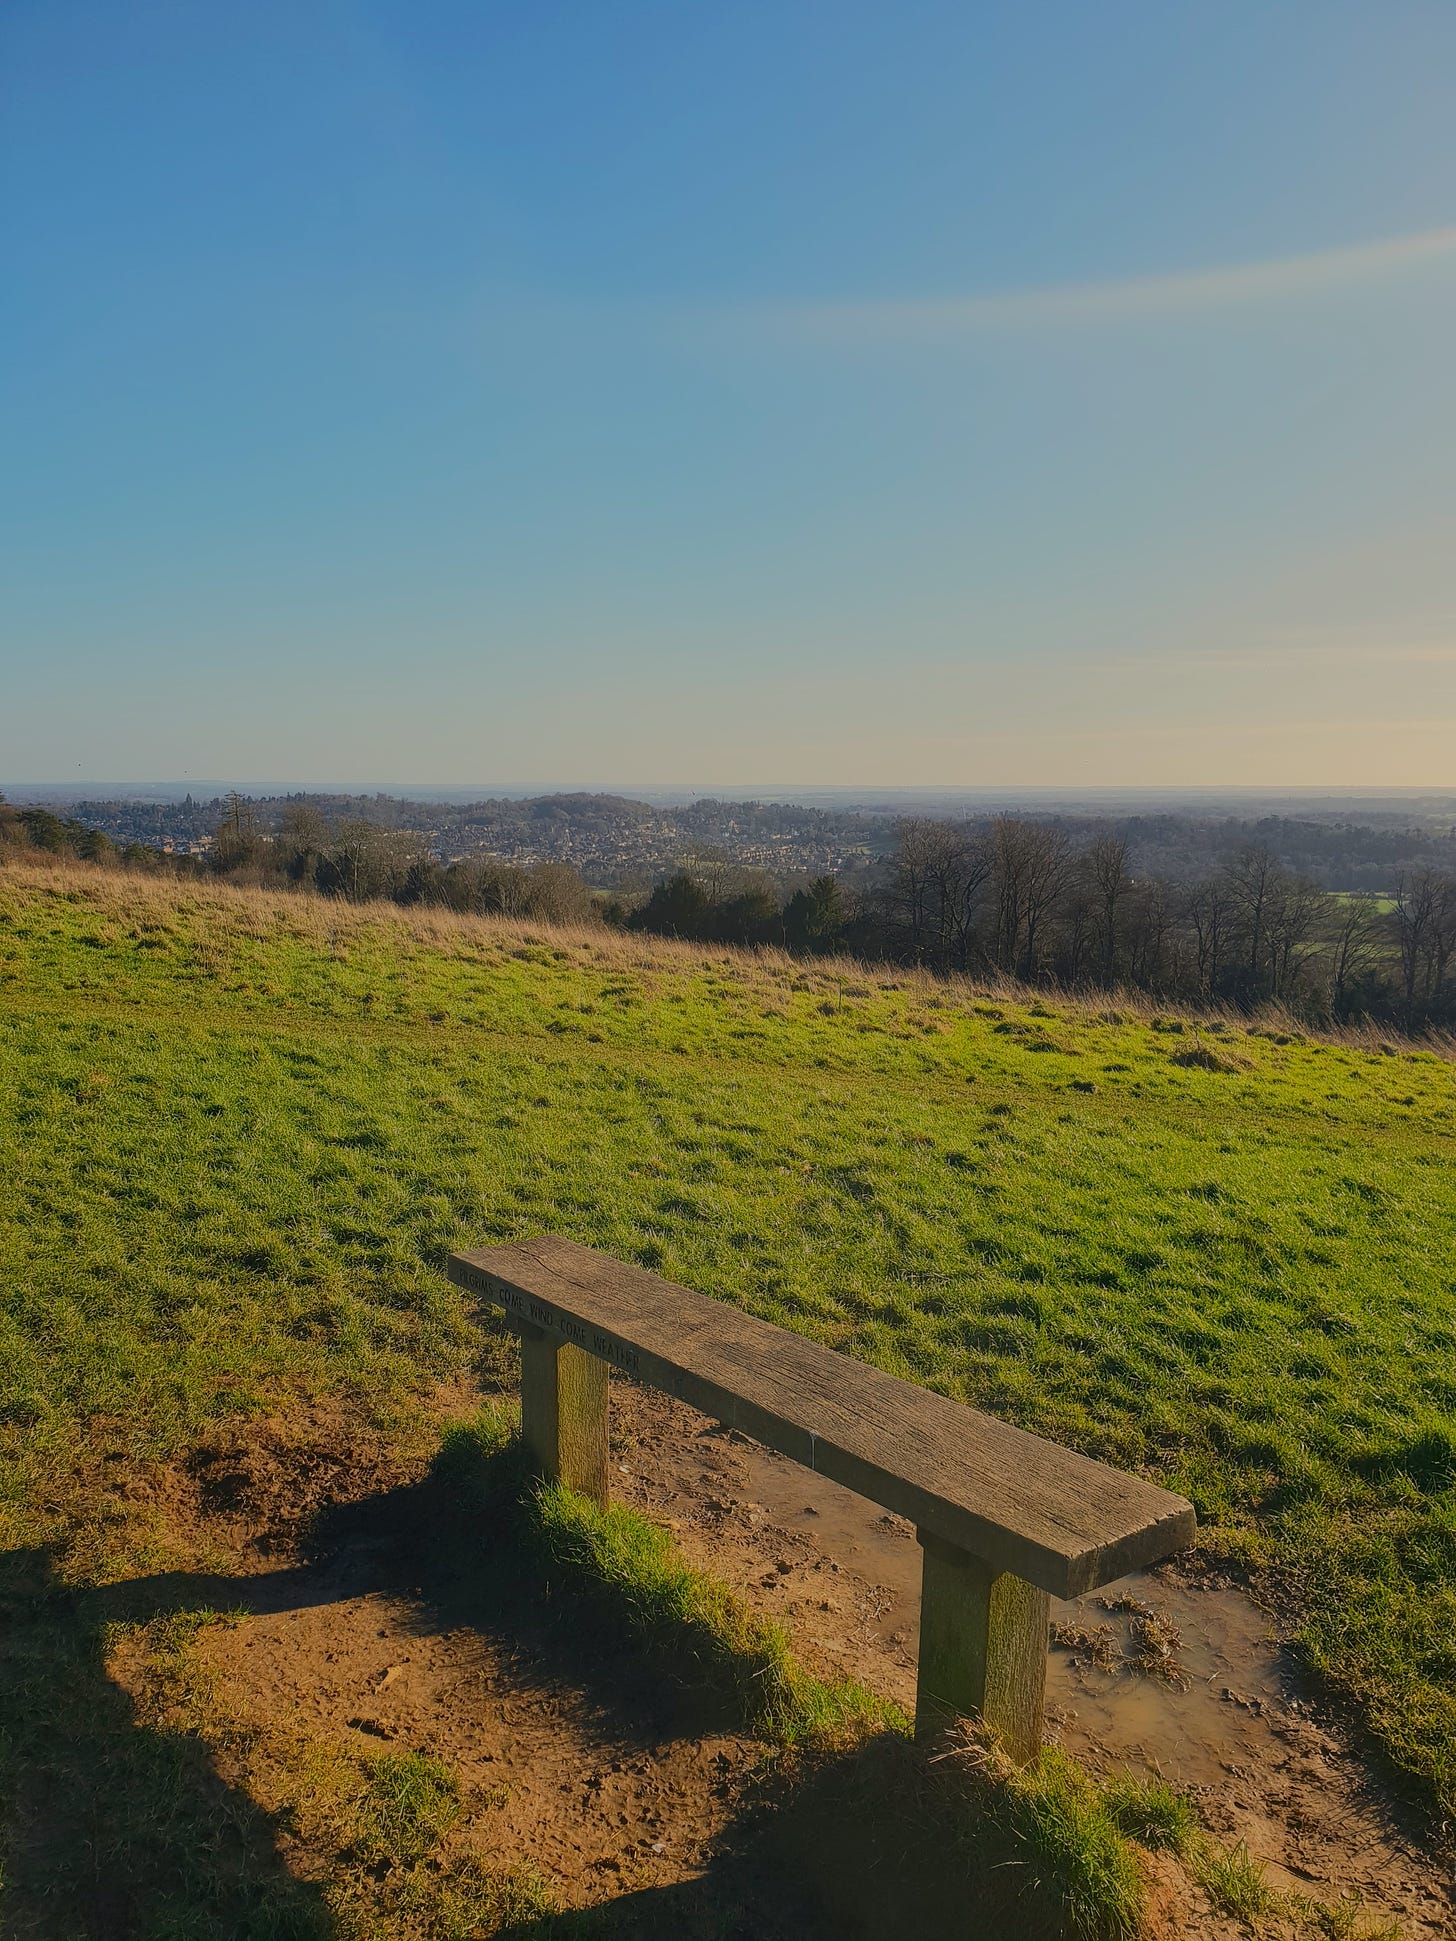 A bench overlooking a hillside on a sunny winter's day